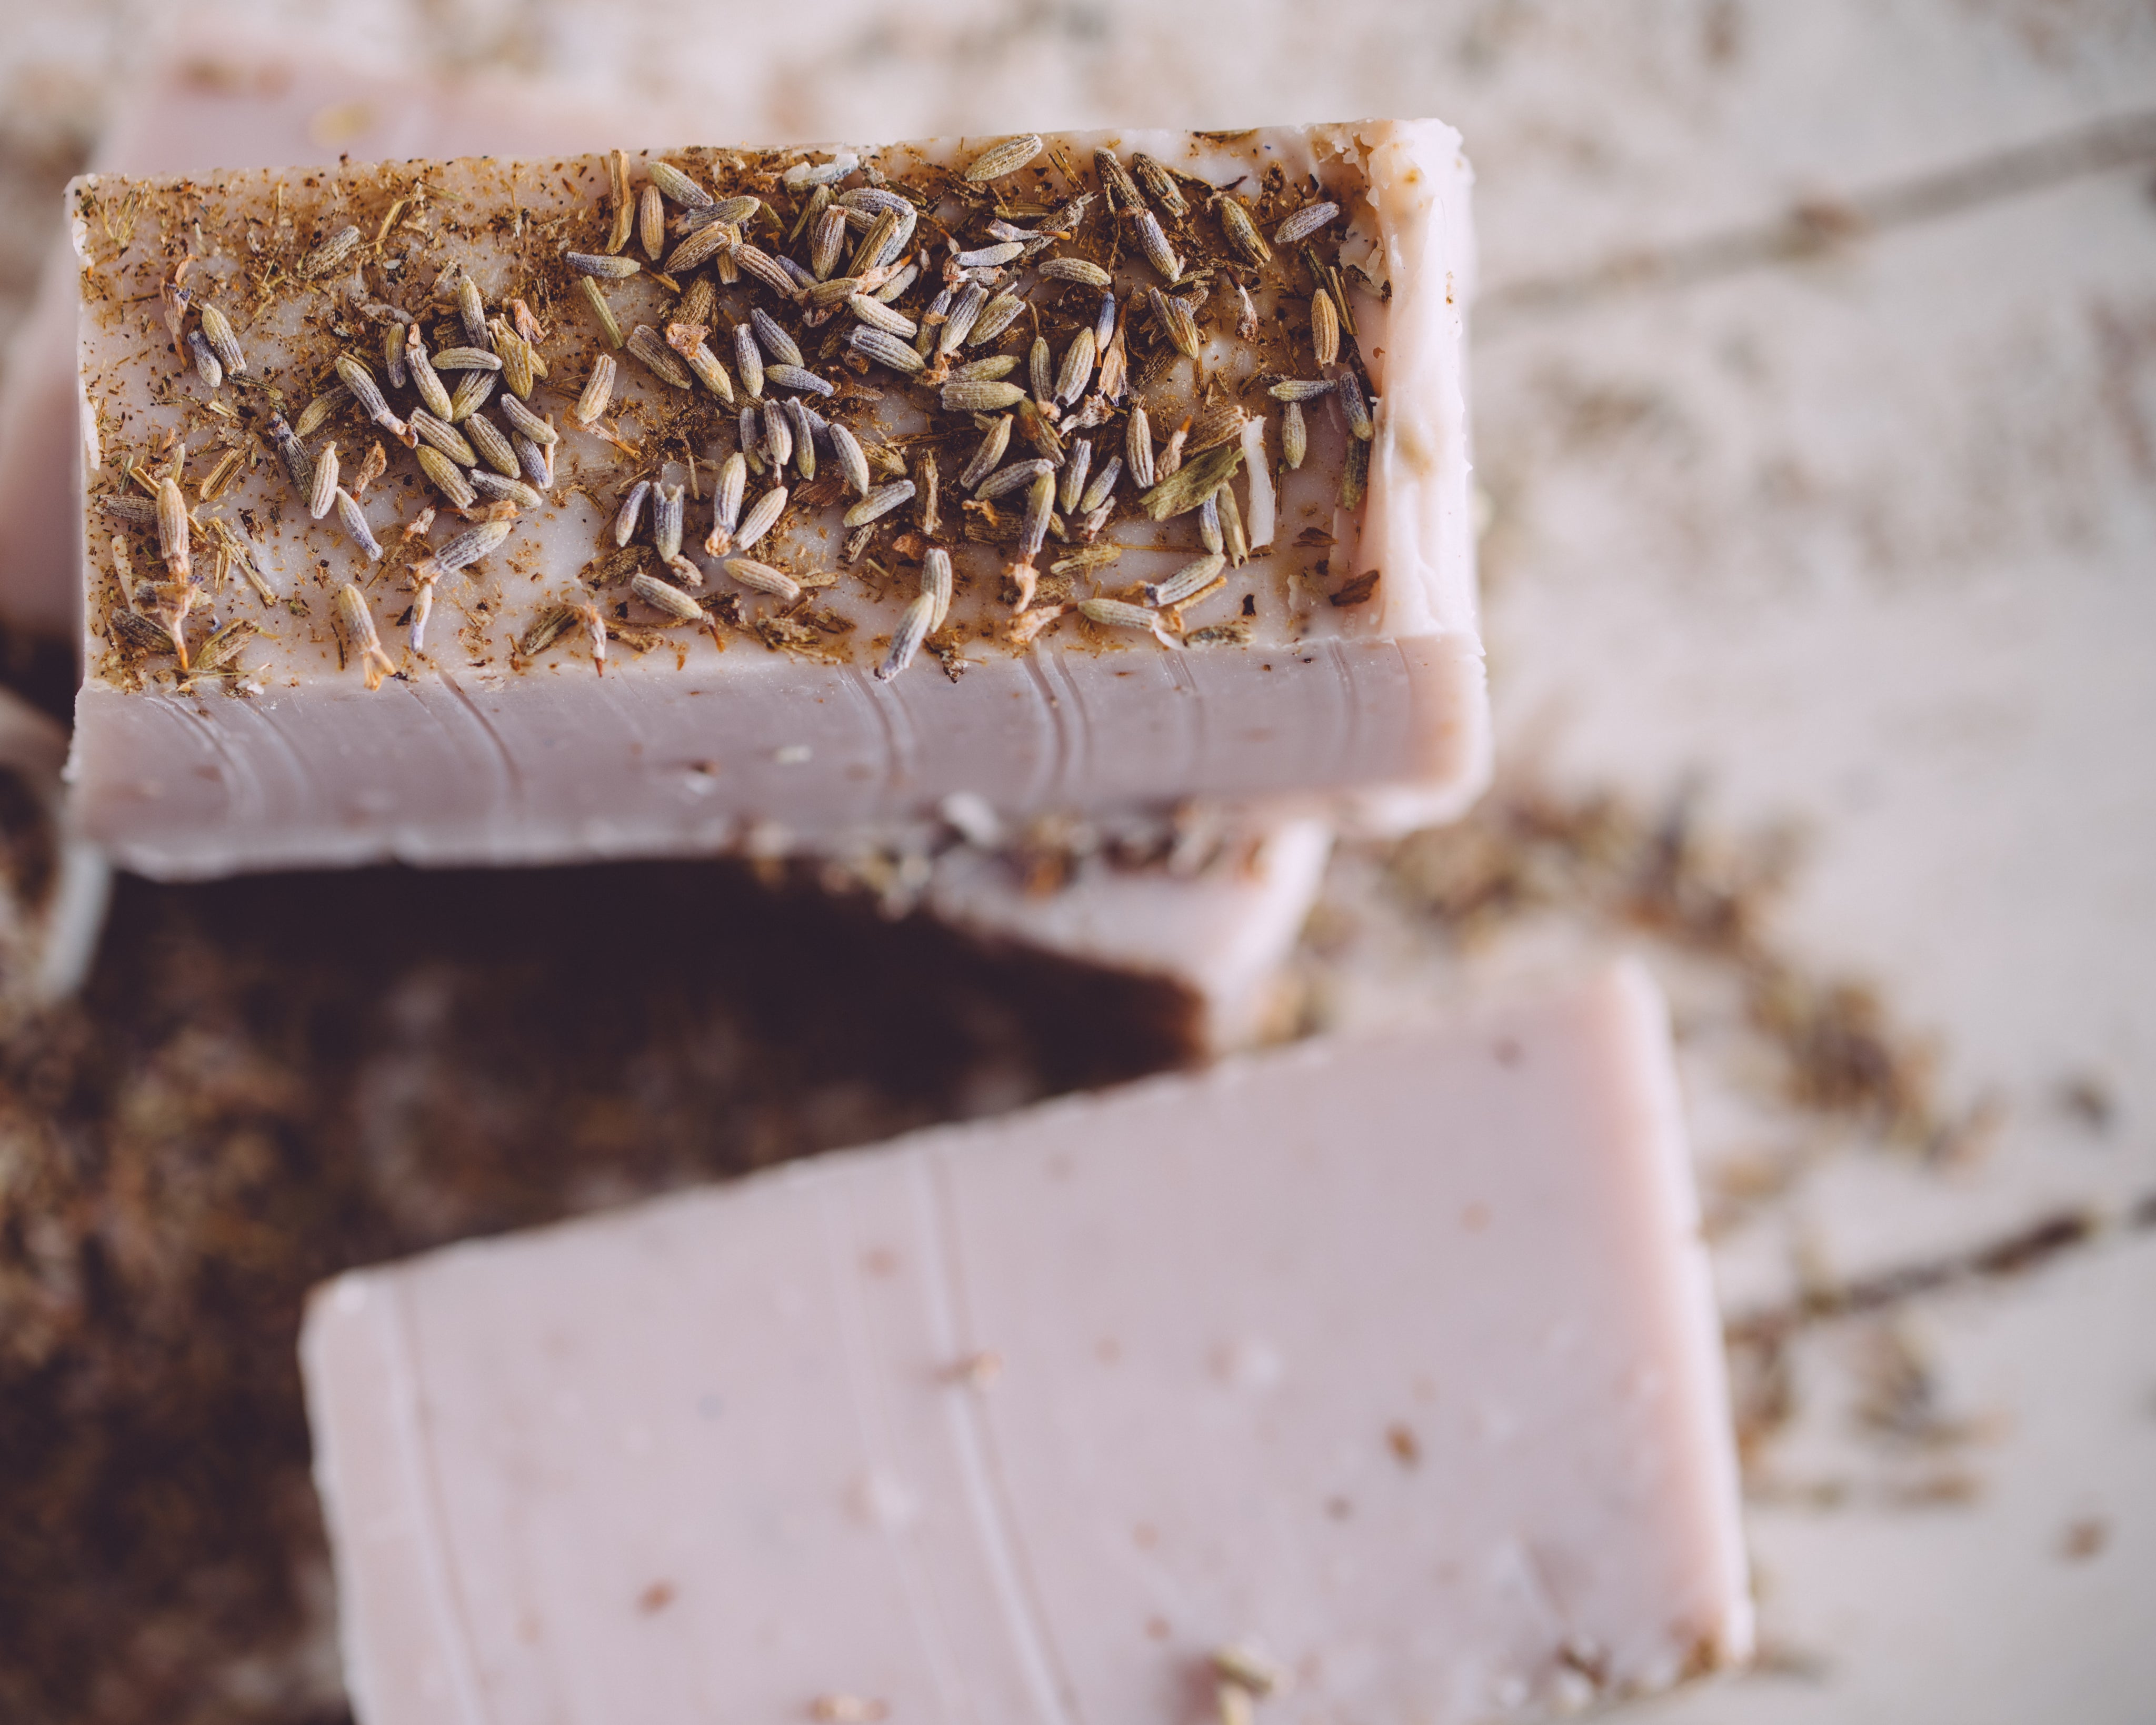 Lavender Bud Organic Handmade Soap. Always made from scratch. This handmade organic lavender soap will last 8-10 weeks in the shower. We also offer our wholesale organic soaps